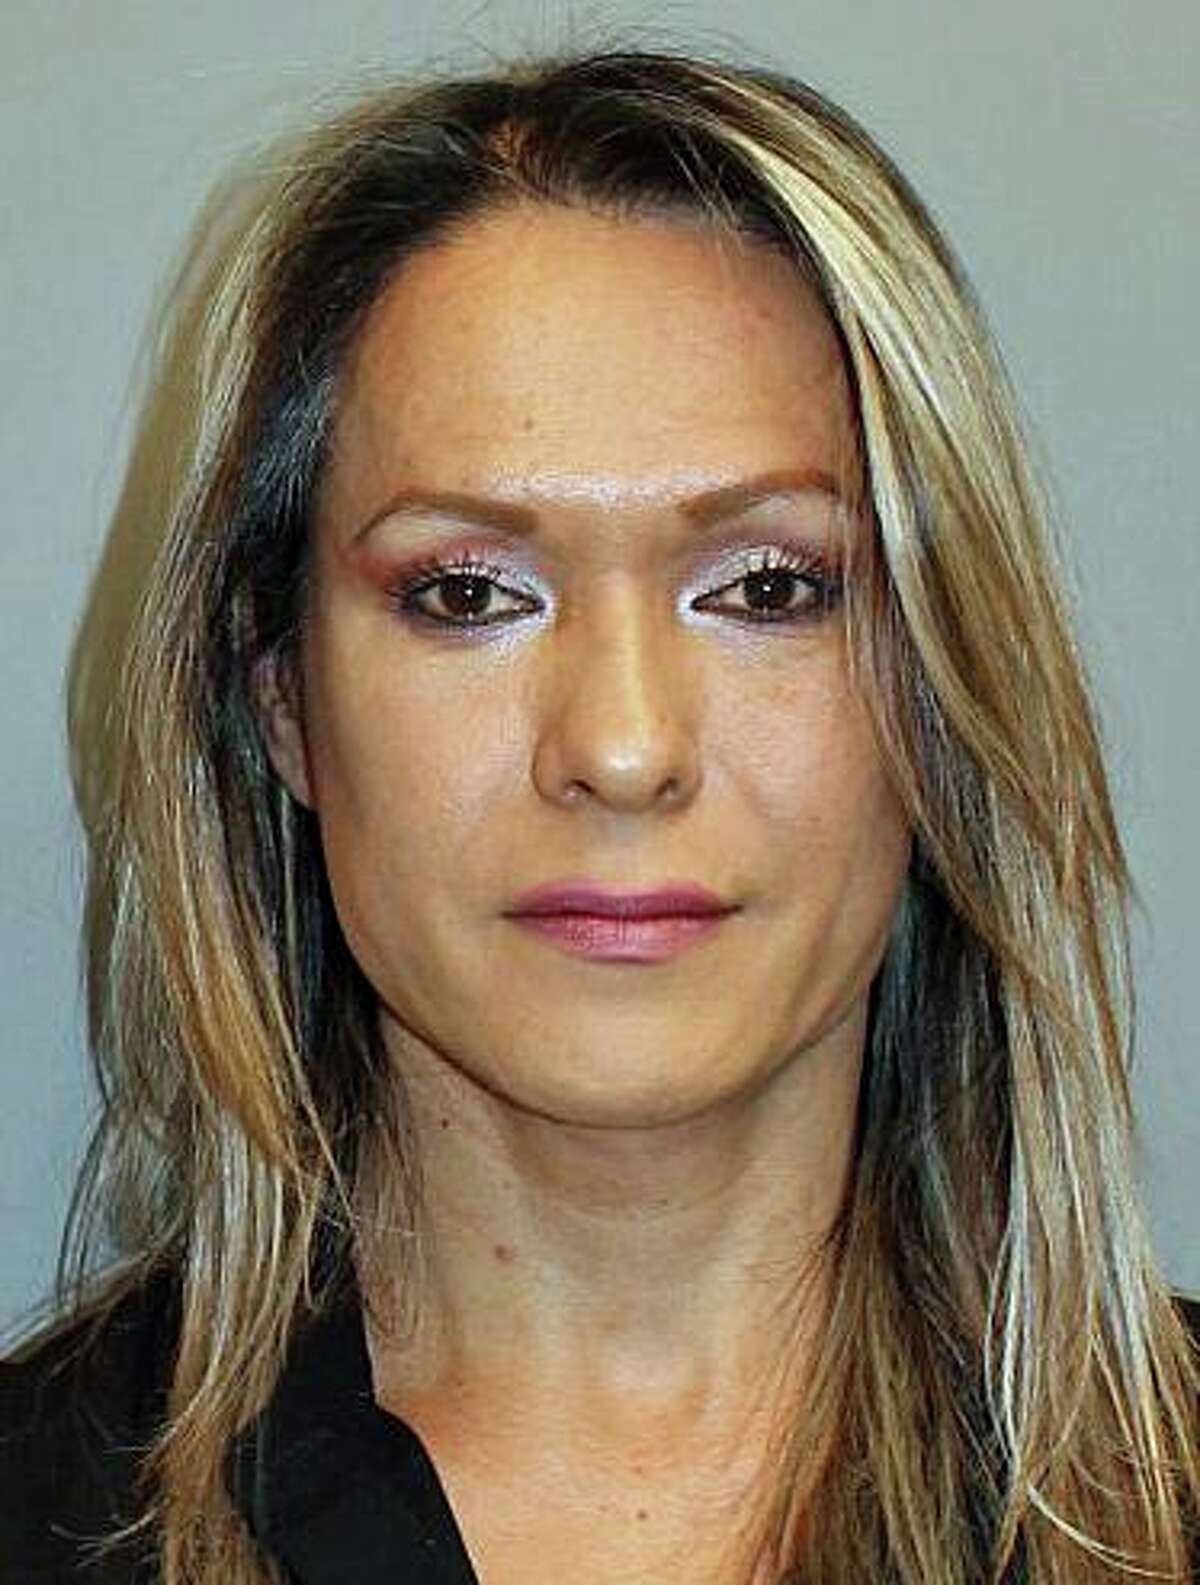 Karoll Angelina Jurado-Hernandez, 46, an employee of Khronos Beauty Salon on Westport Avenue in Norwalk, was charged with second-degree sexual assault and risk of injury to a minor. The investigation revealed that on Aug. 24, 2019, Jurado-Hernandez had sexually assaulted the juvenile victim within the establishment.